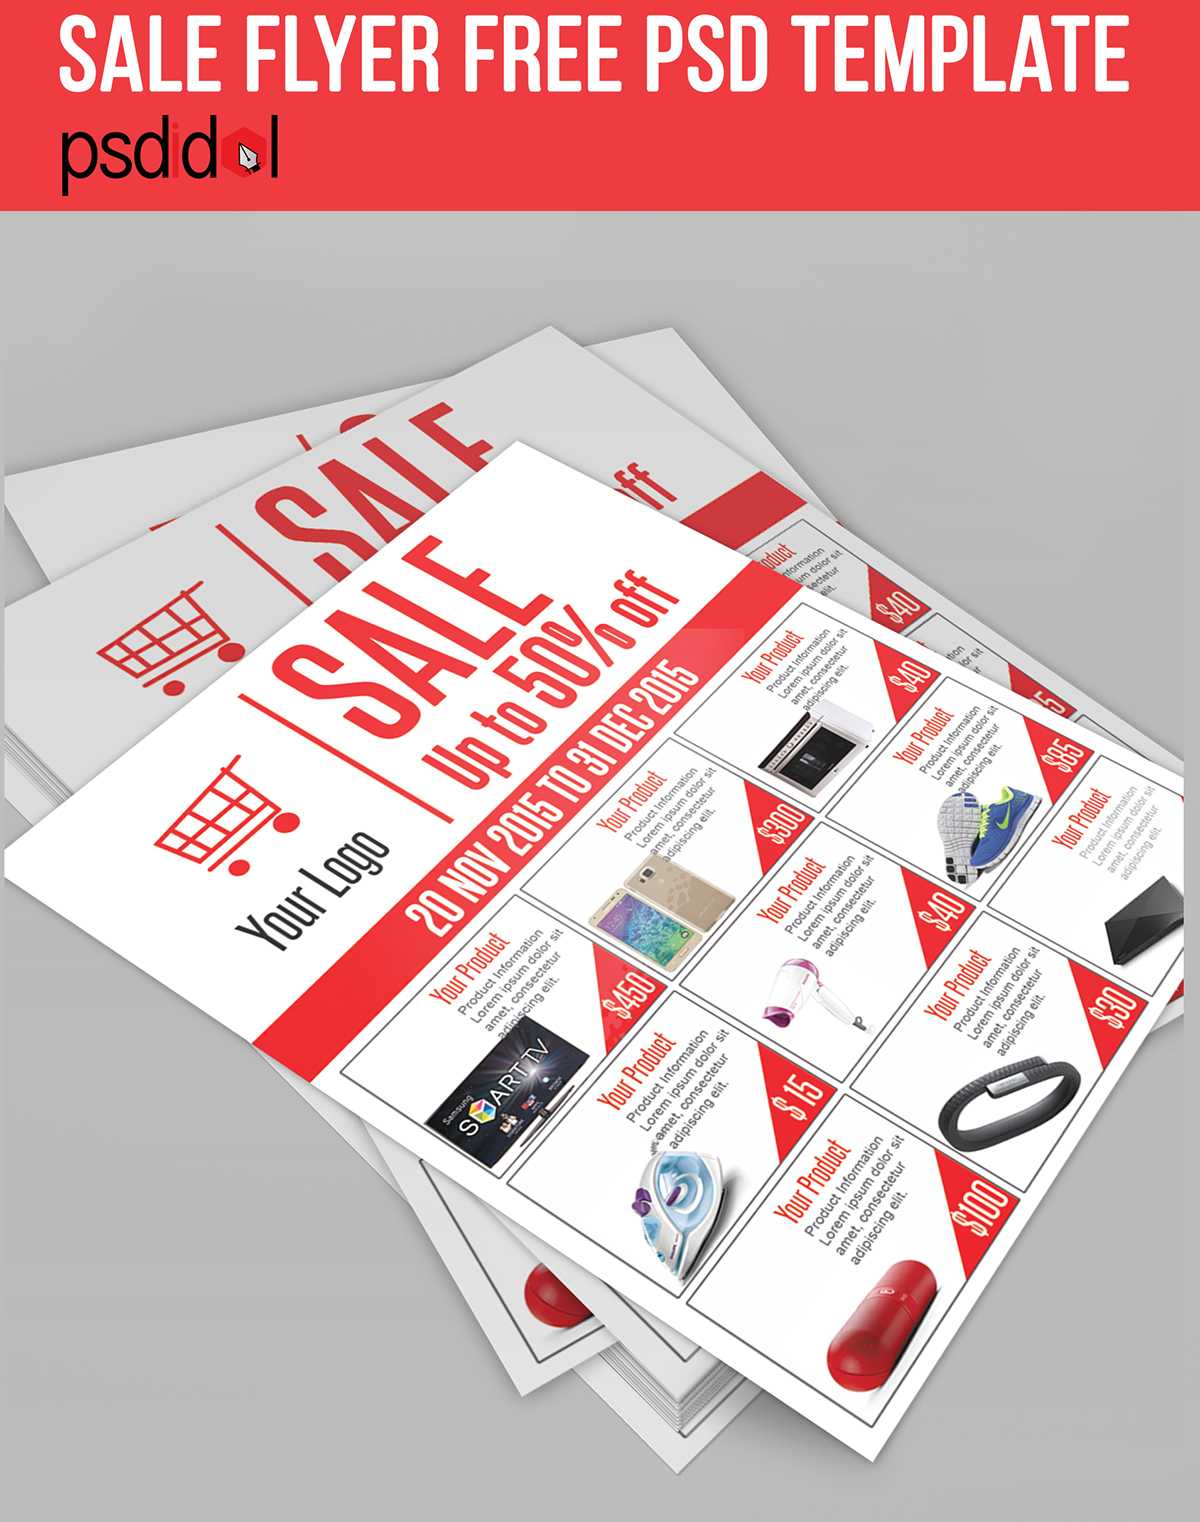 Sale Flyer Free Psd Template Download On Behance Inside Free Ad Flyer Templates